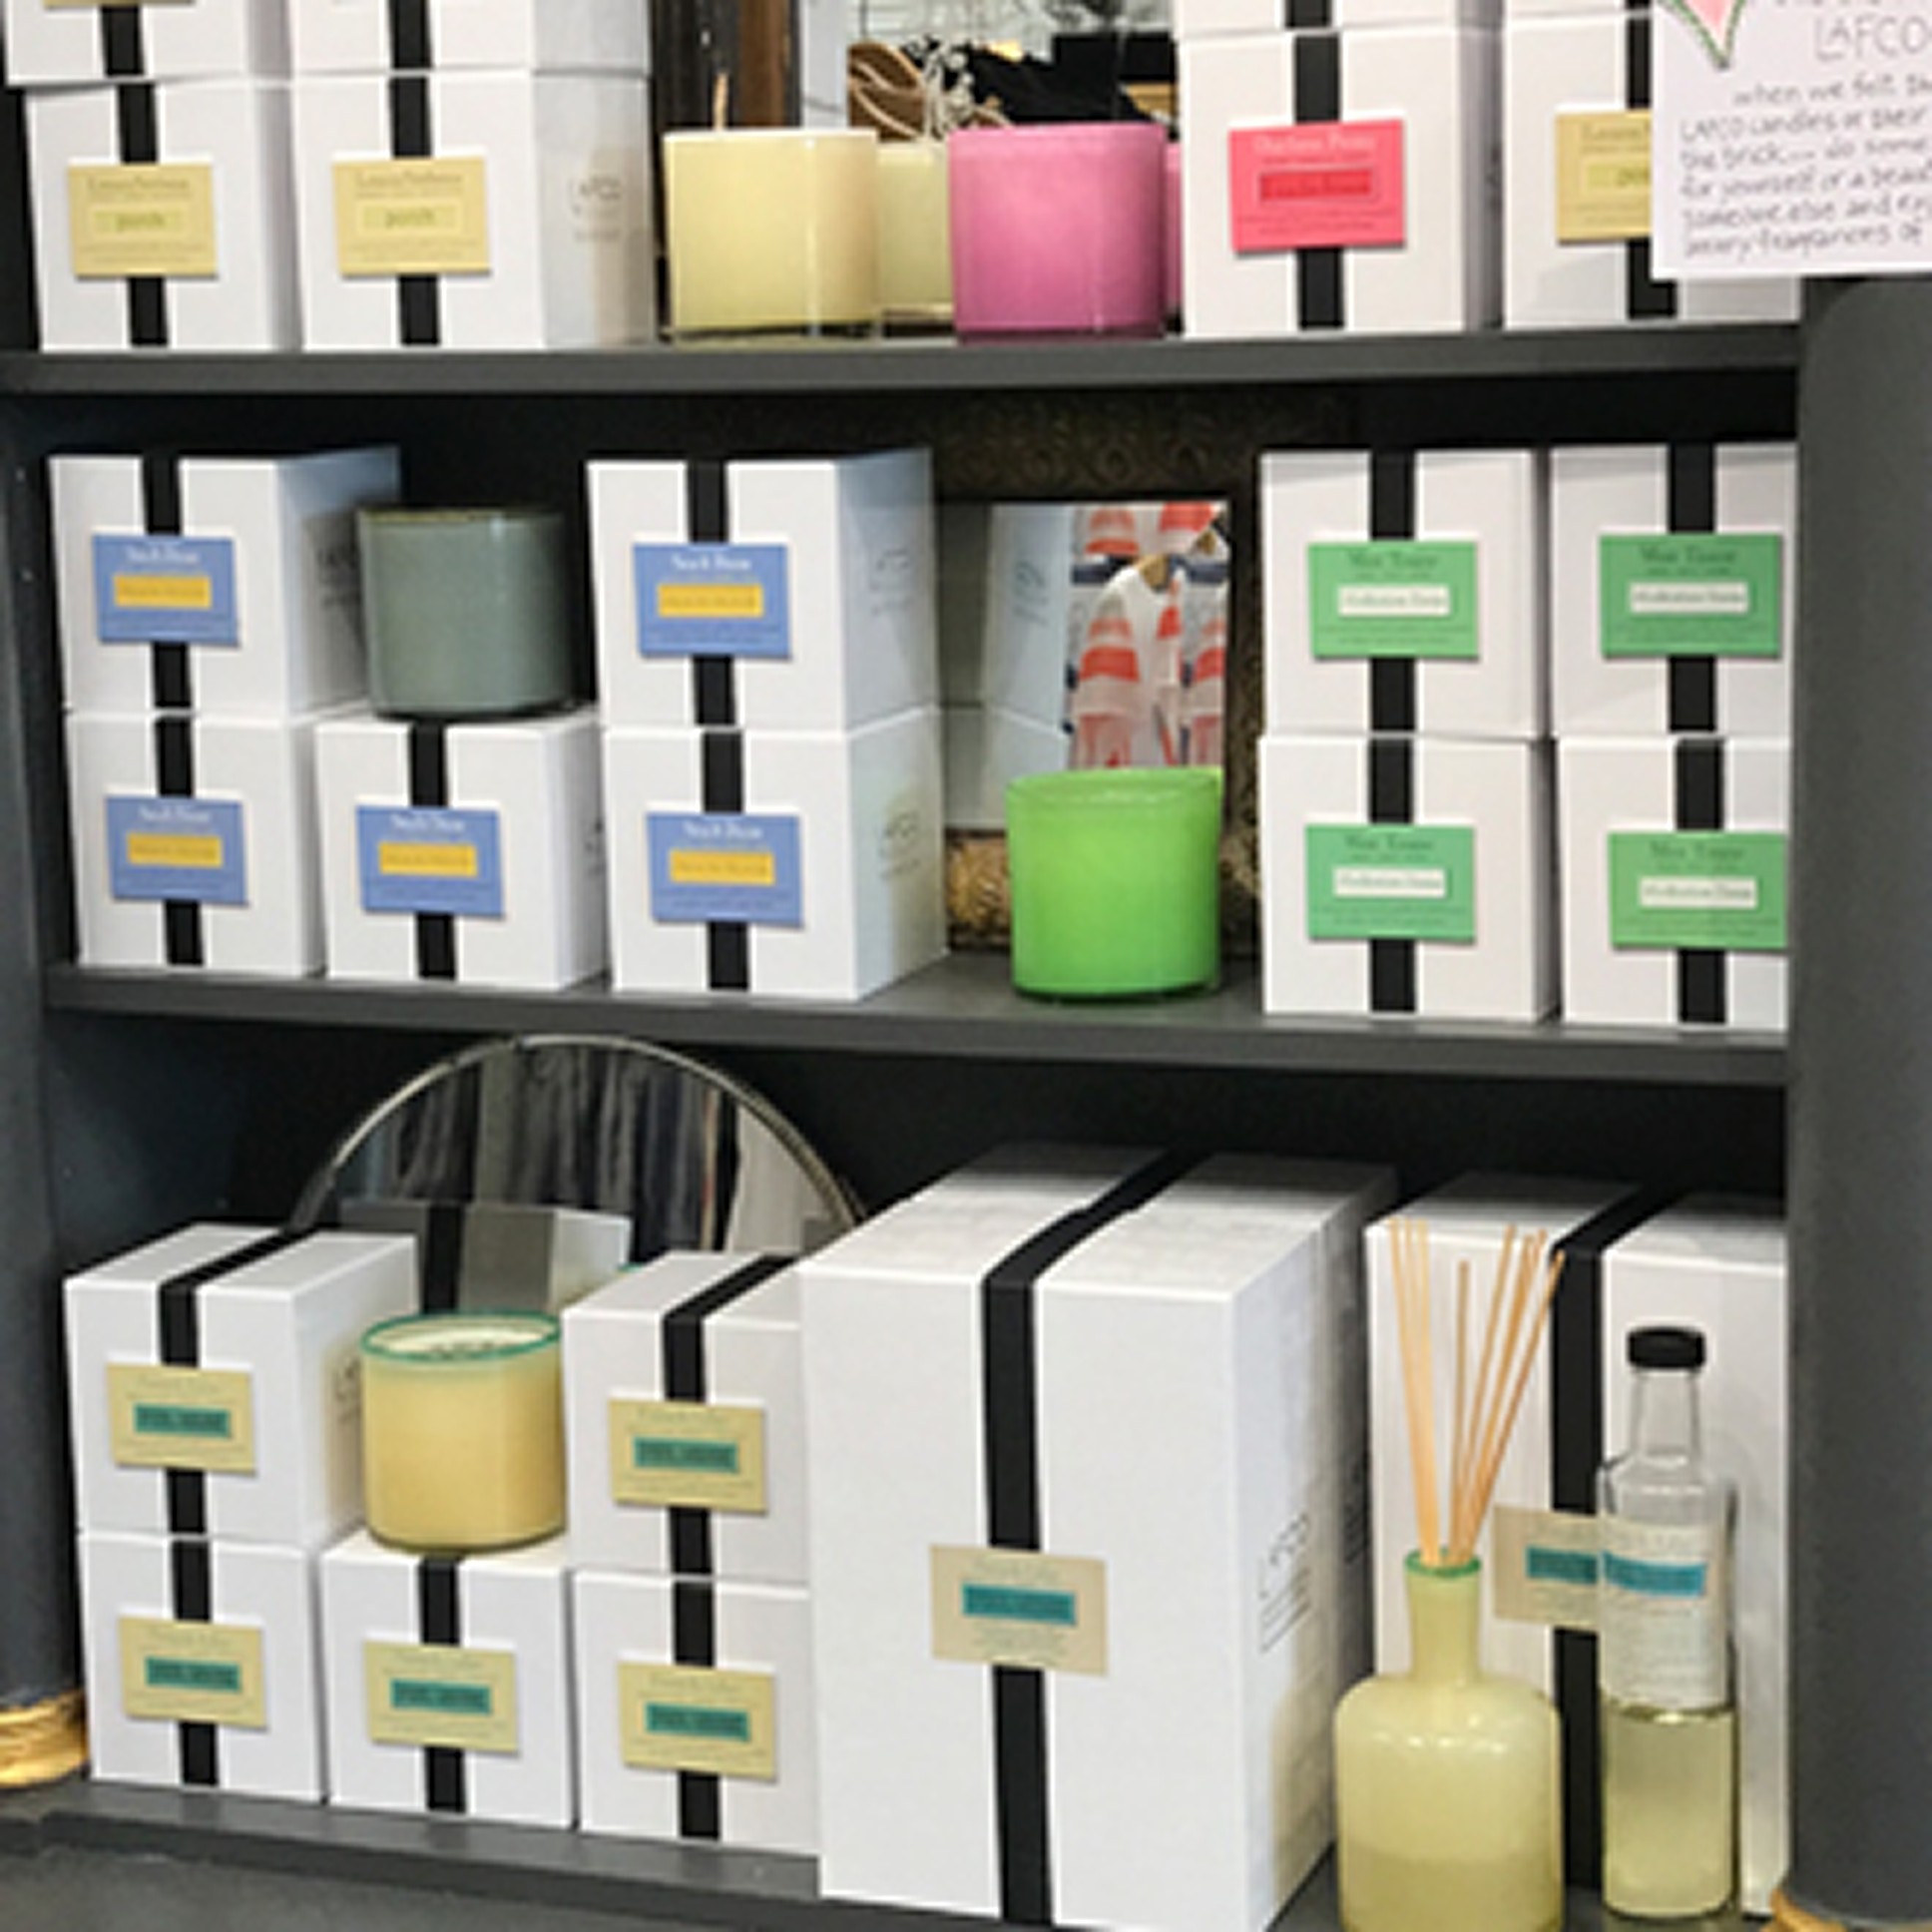 Shelves of Products